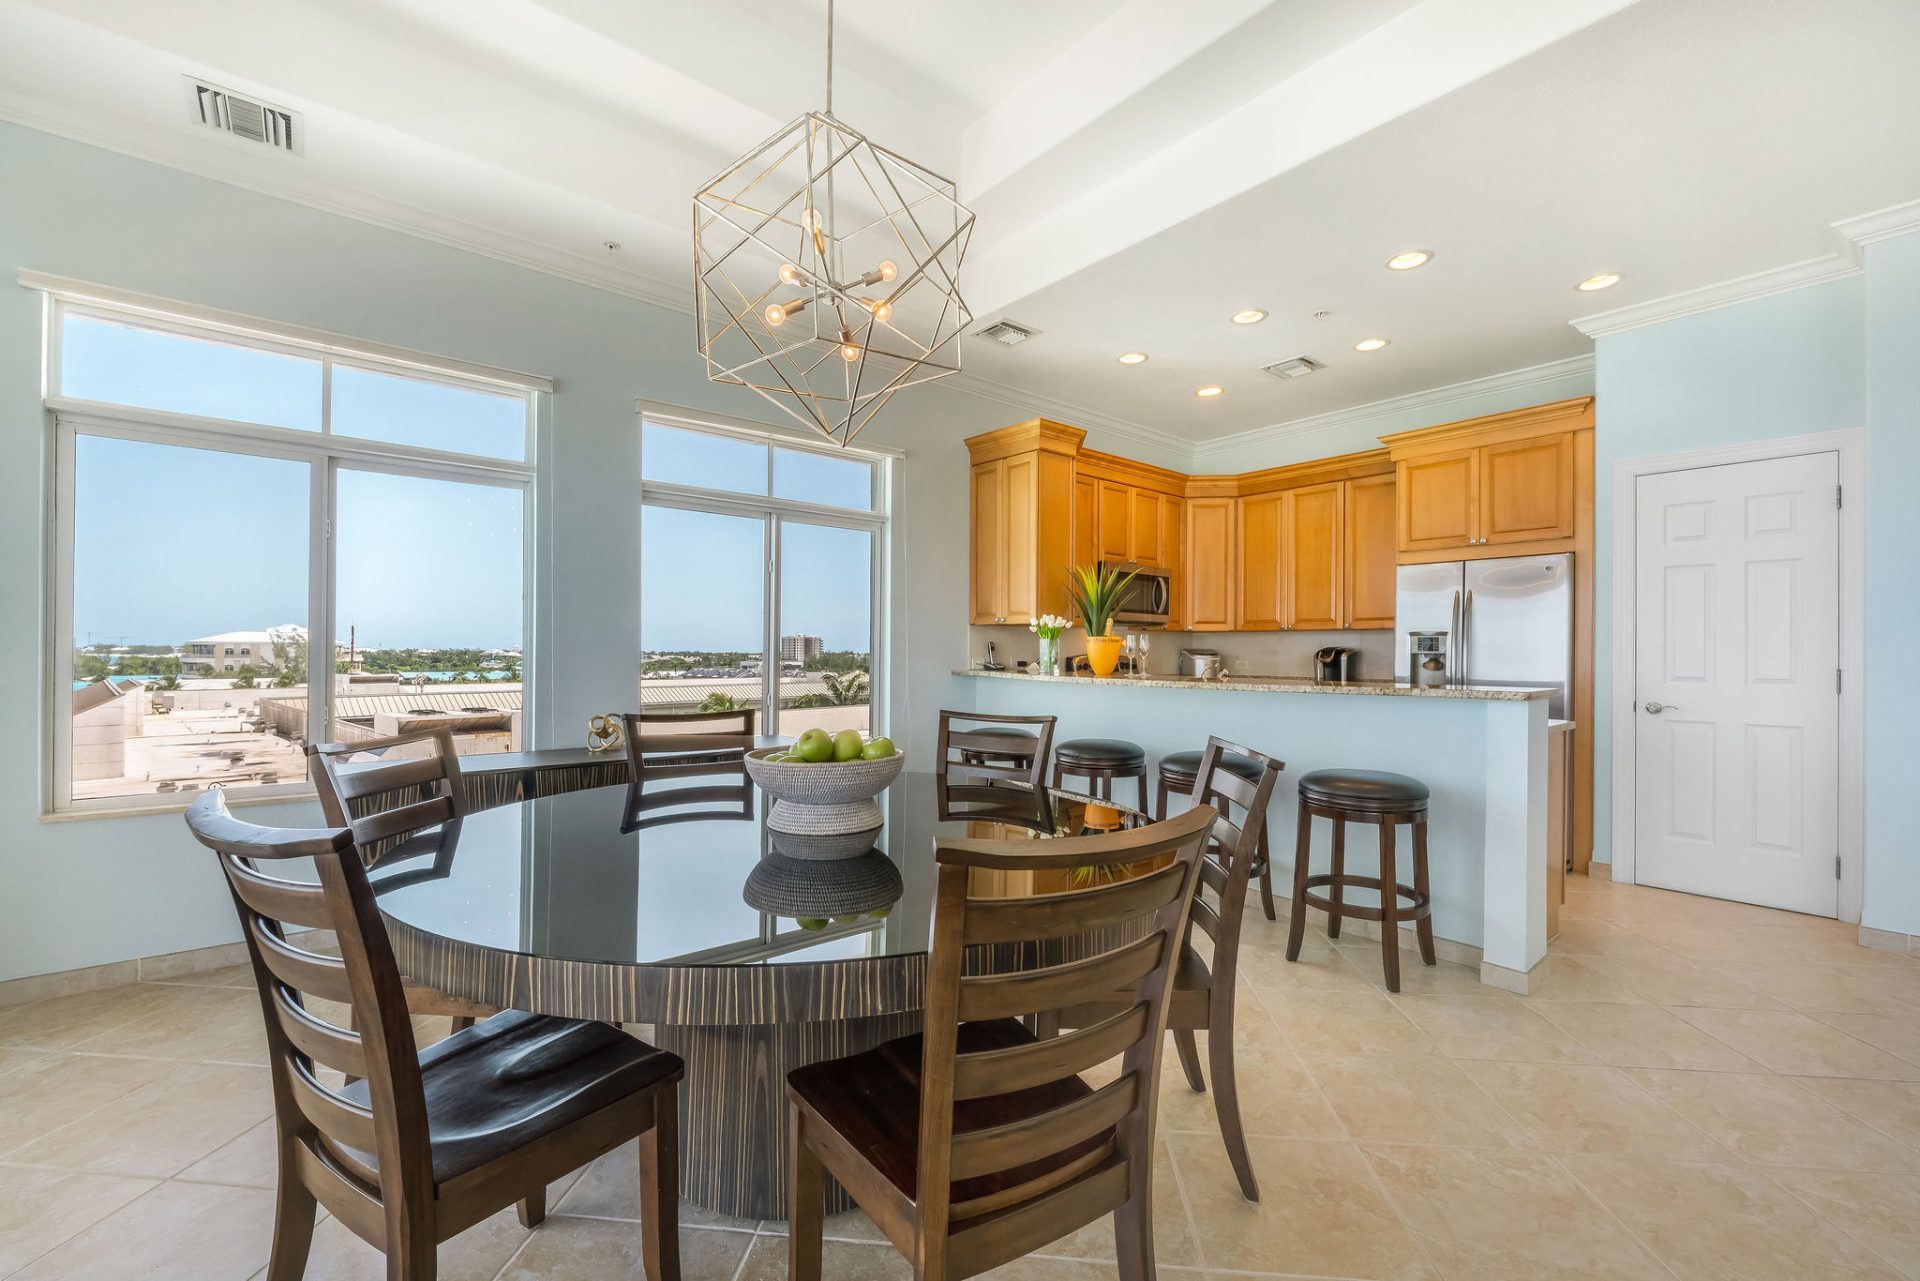 South Bay Beach Club Penthouse dining are